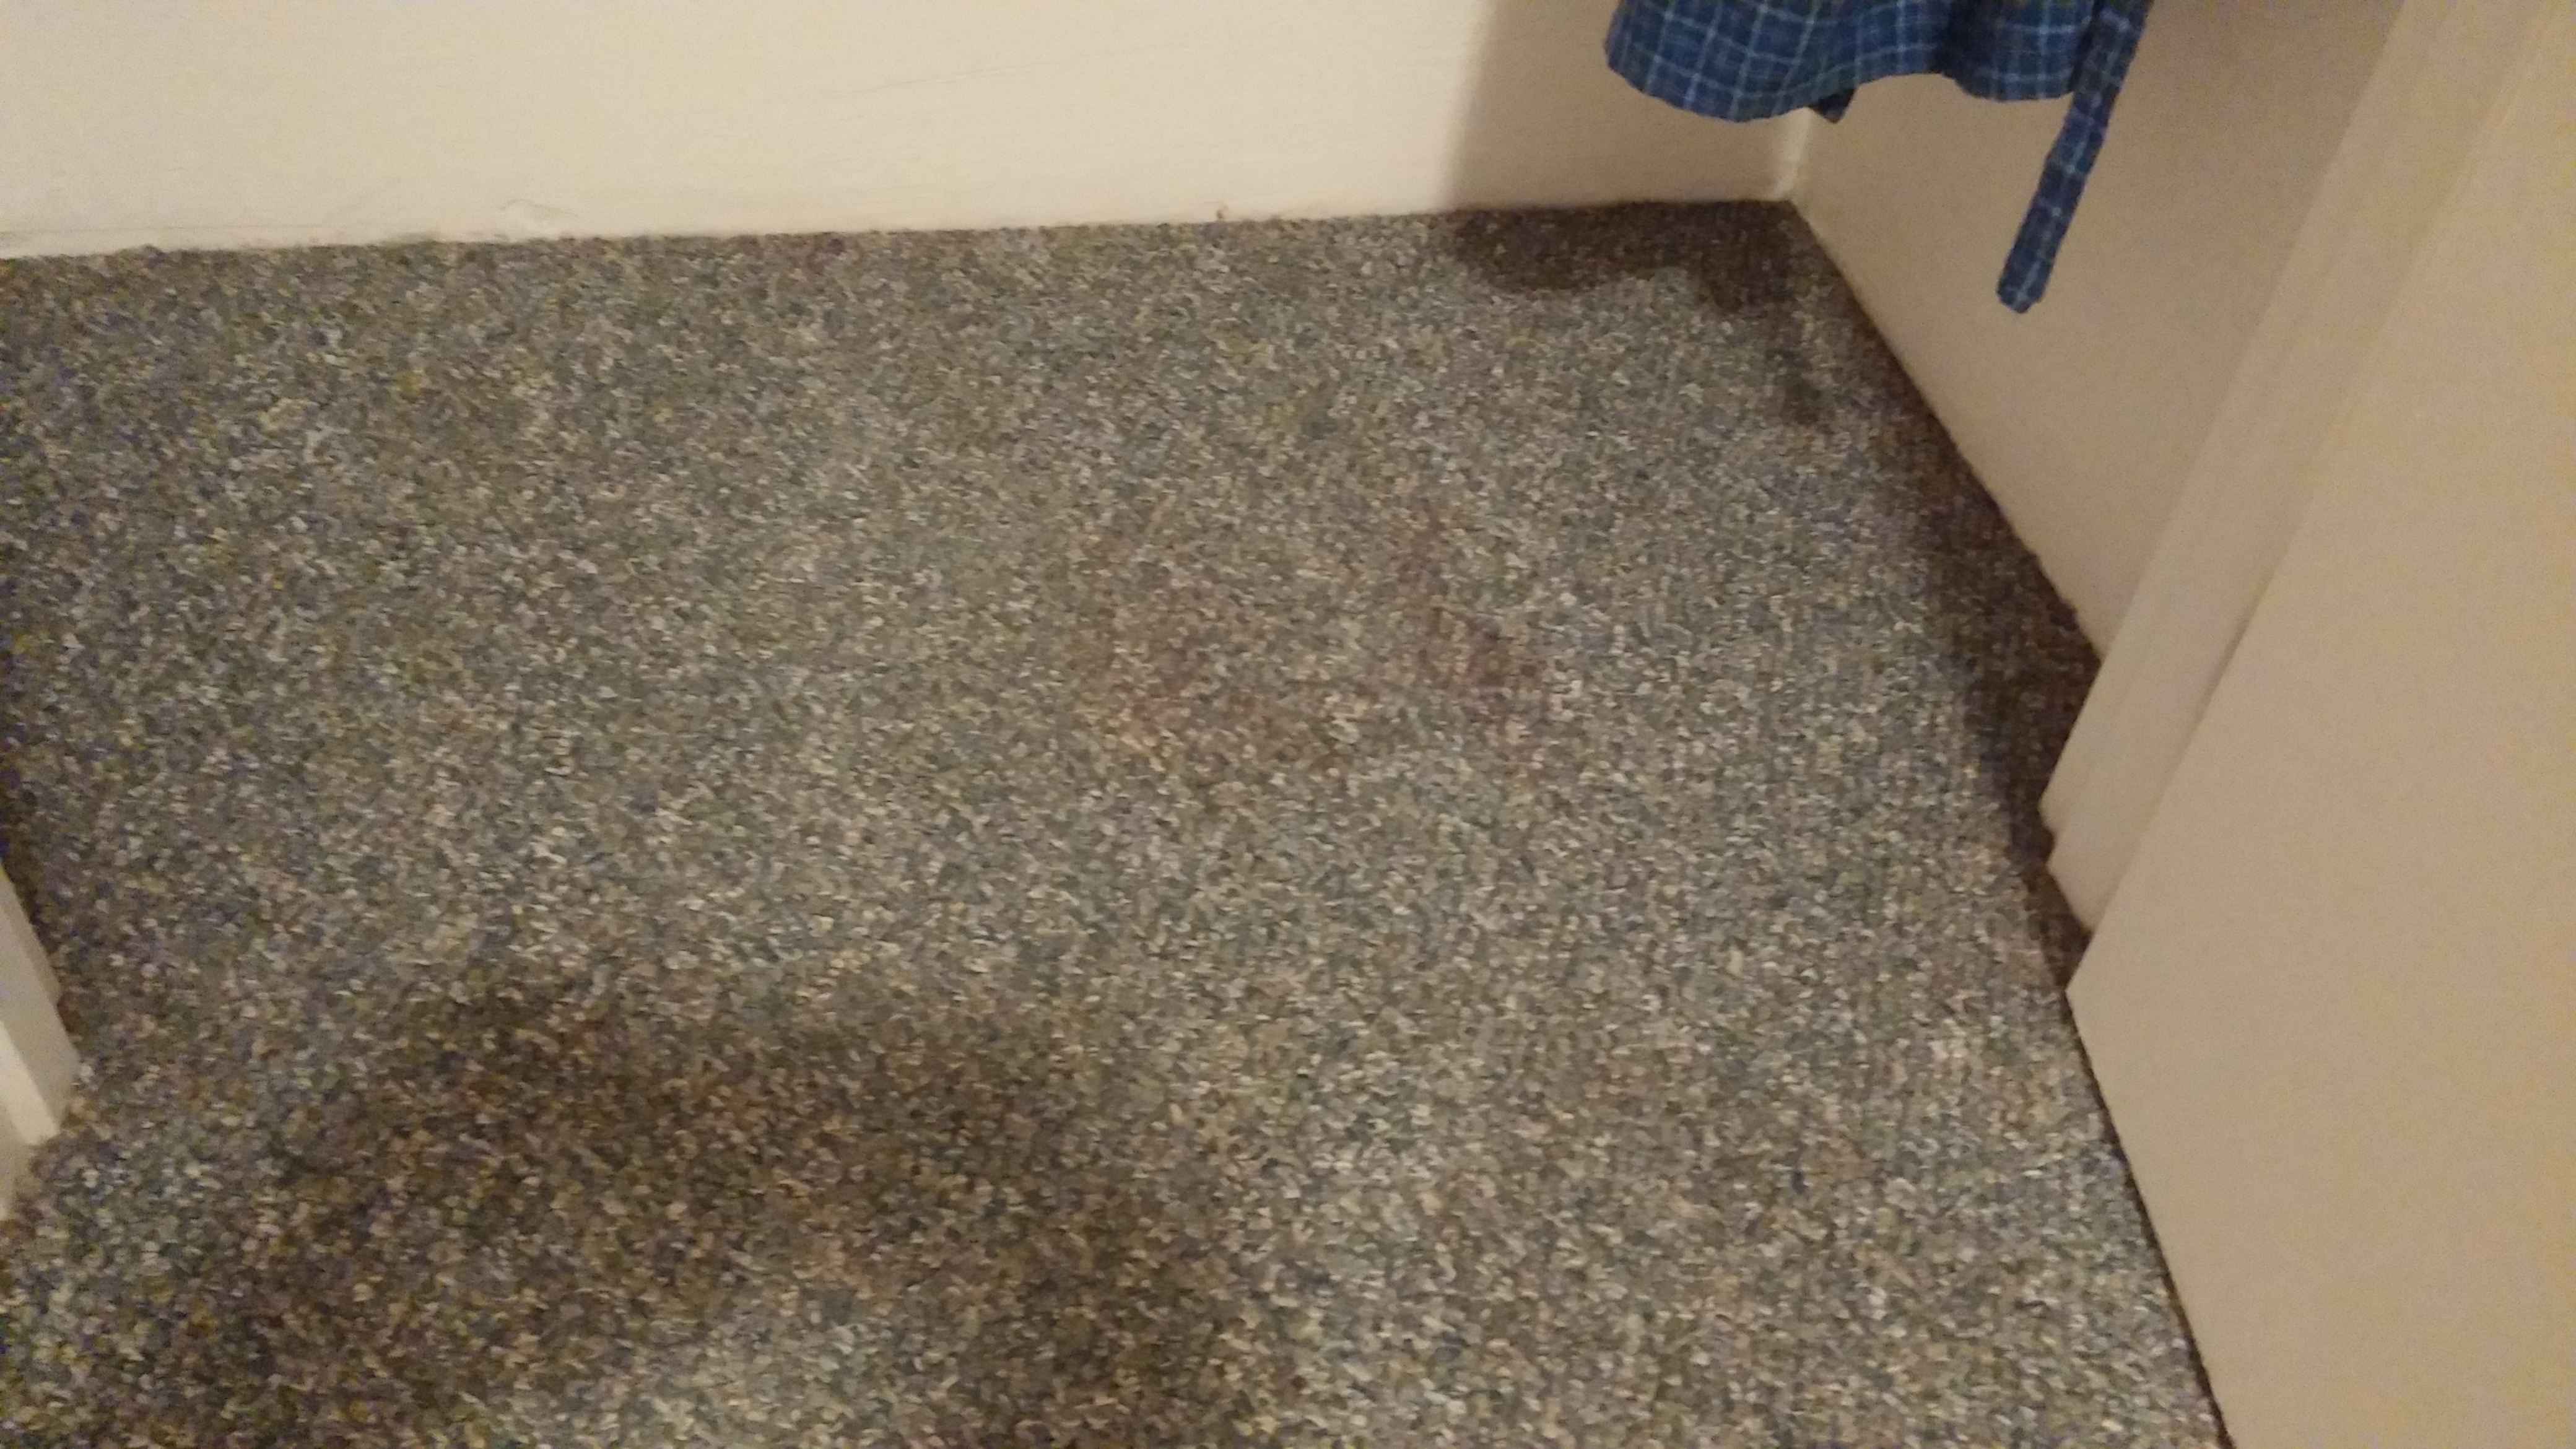 ChemDry Left a Dirty Carpet.  They couldn't get it out.